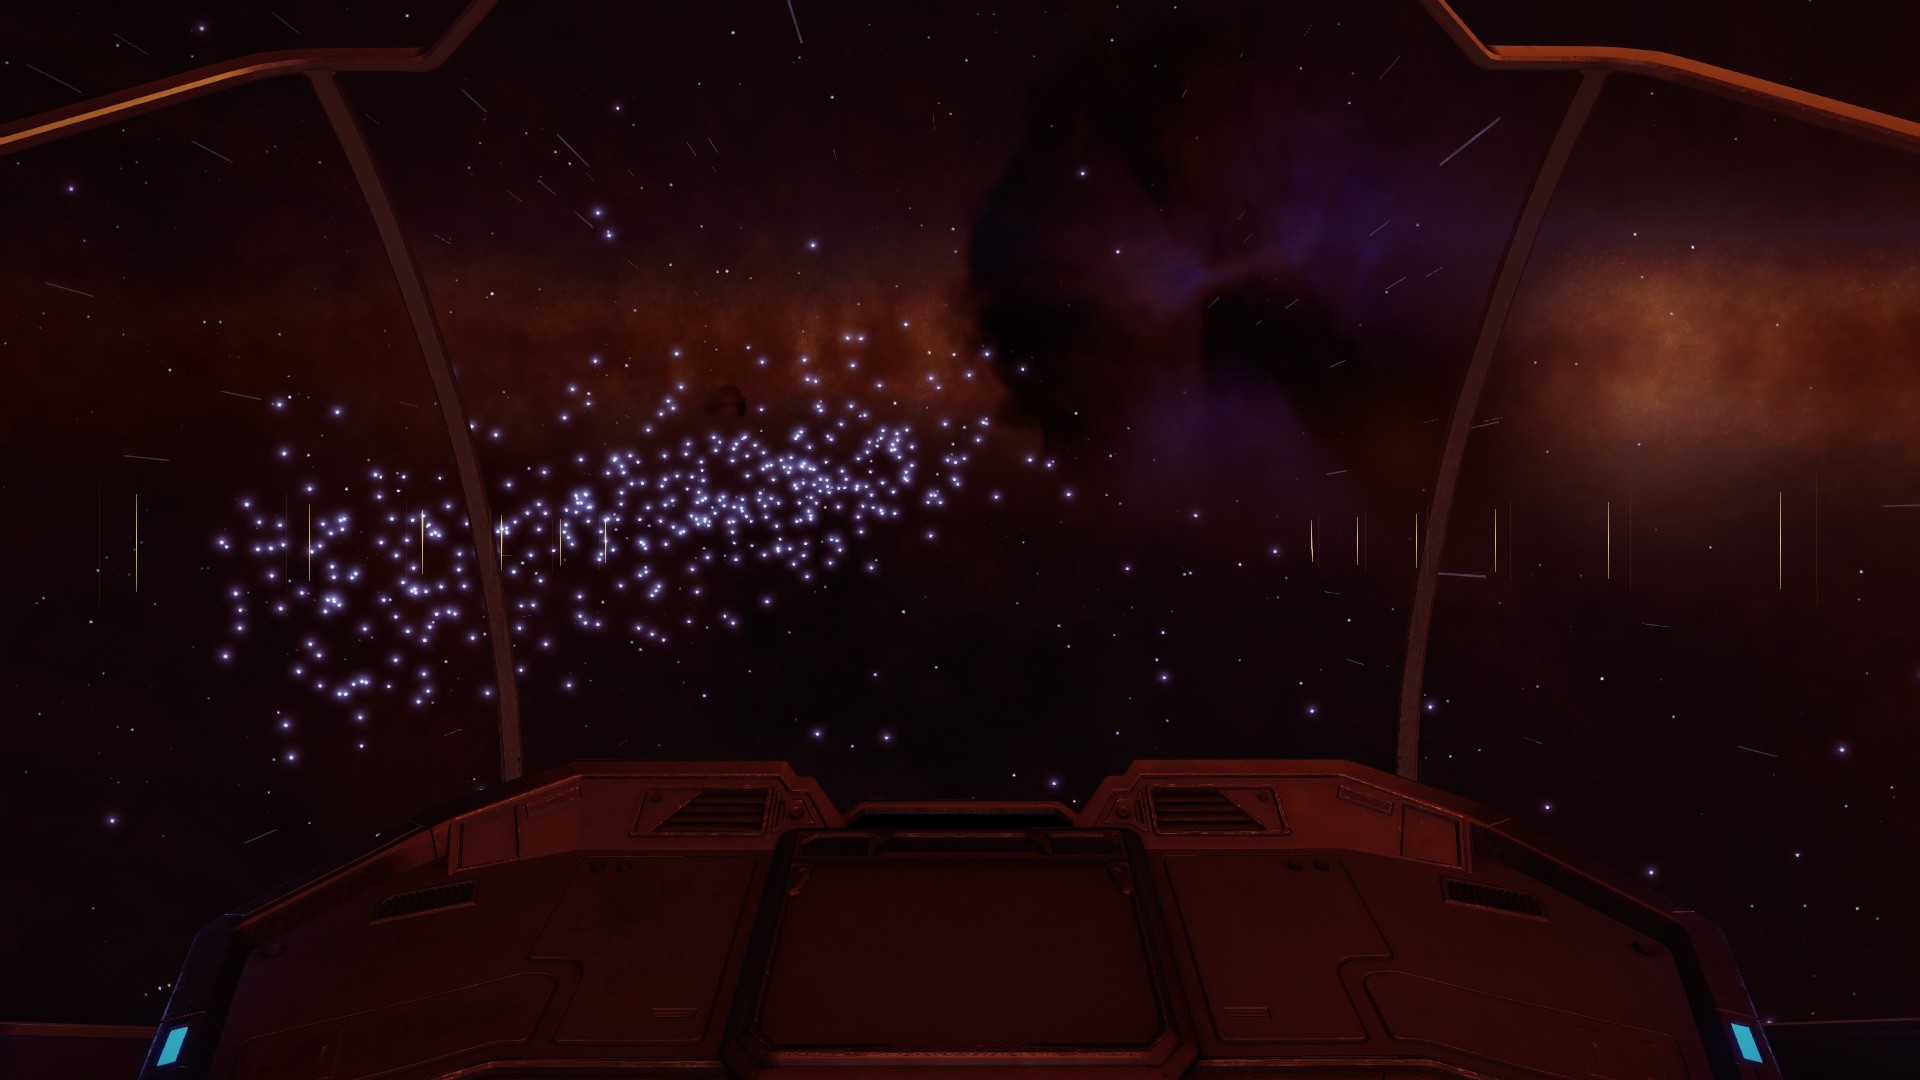 I Loved the view of the star cluster embracing the nebulae